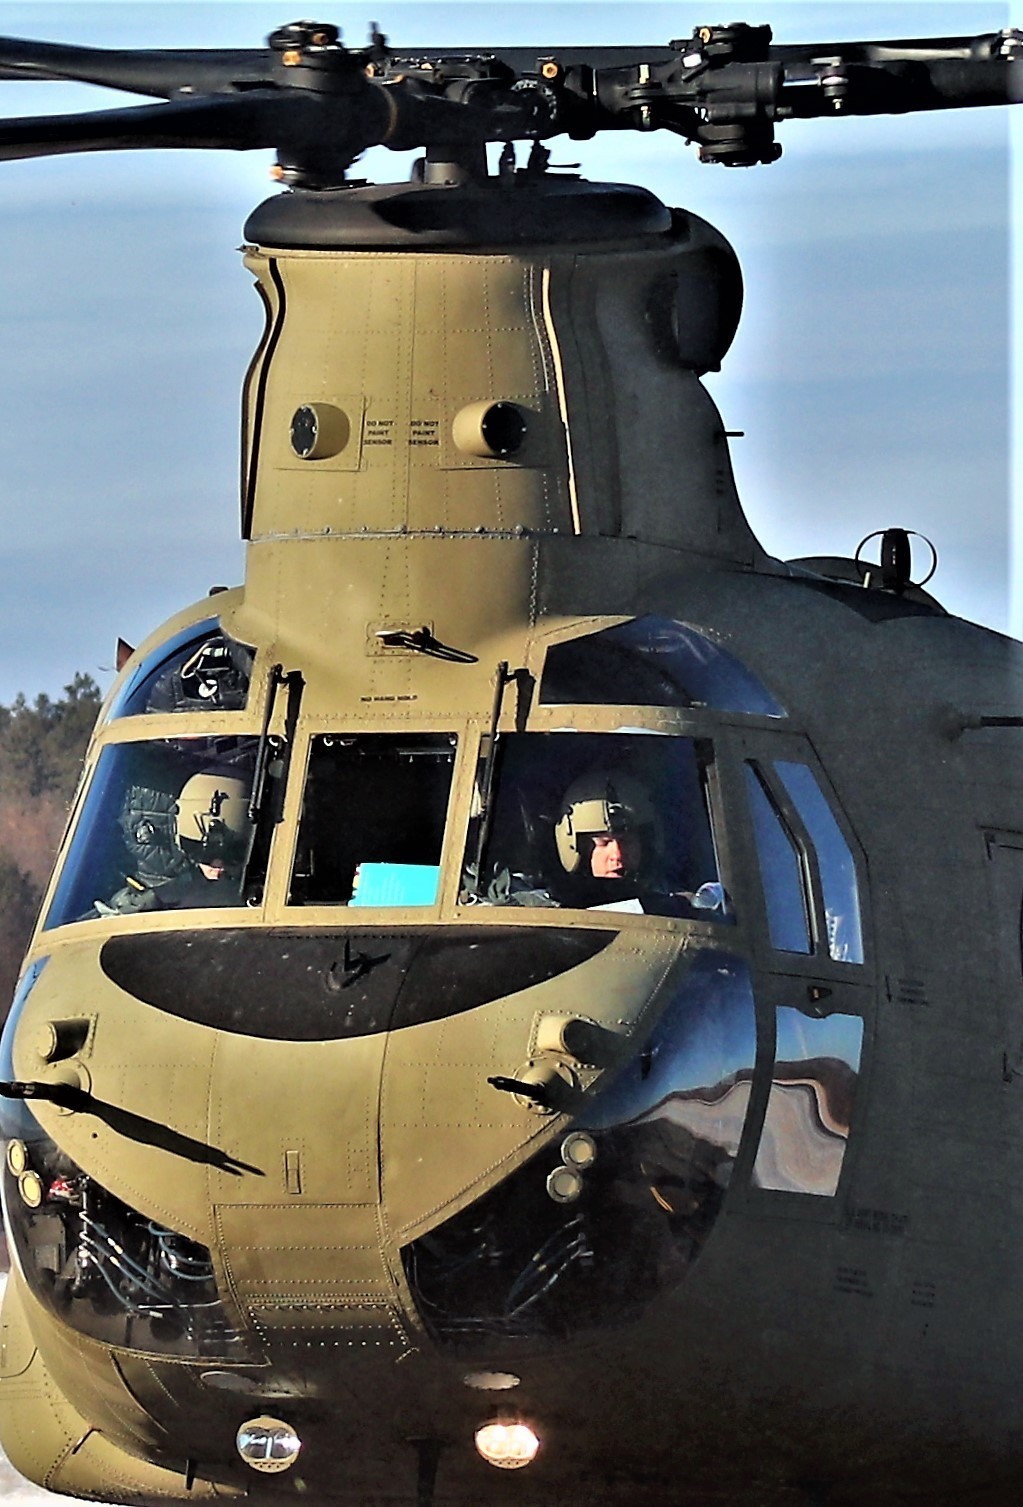 Photo Essay Crew Guides Ch 47 Chinook For Sling Load Training Support At Fort Mccoy Article 